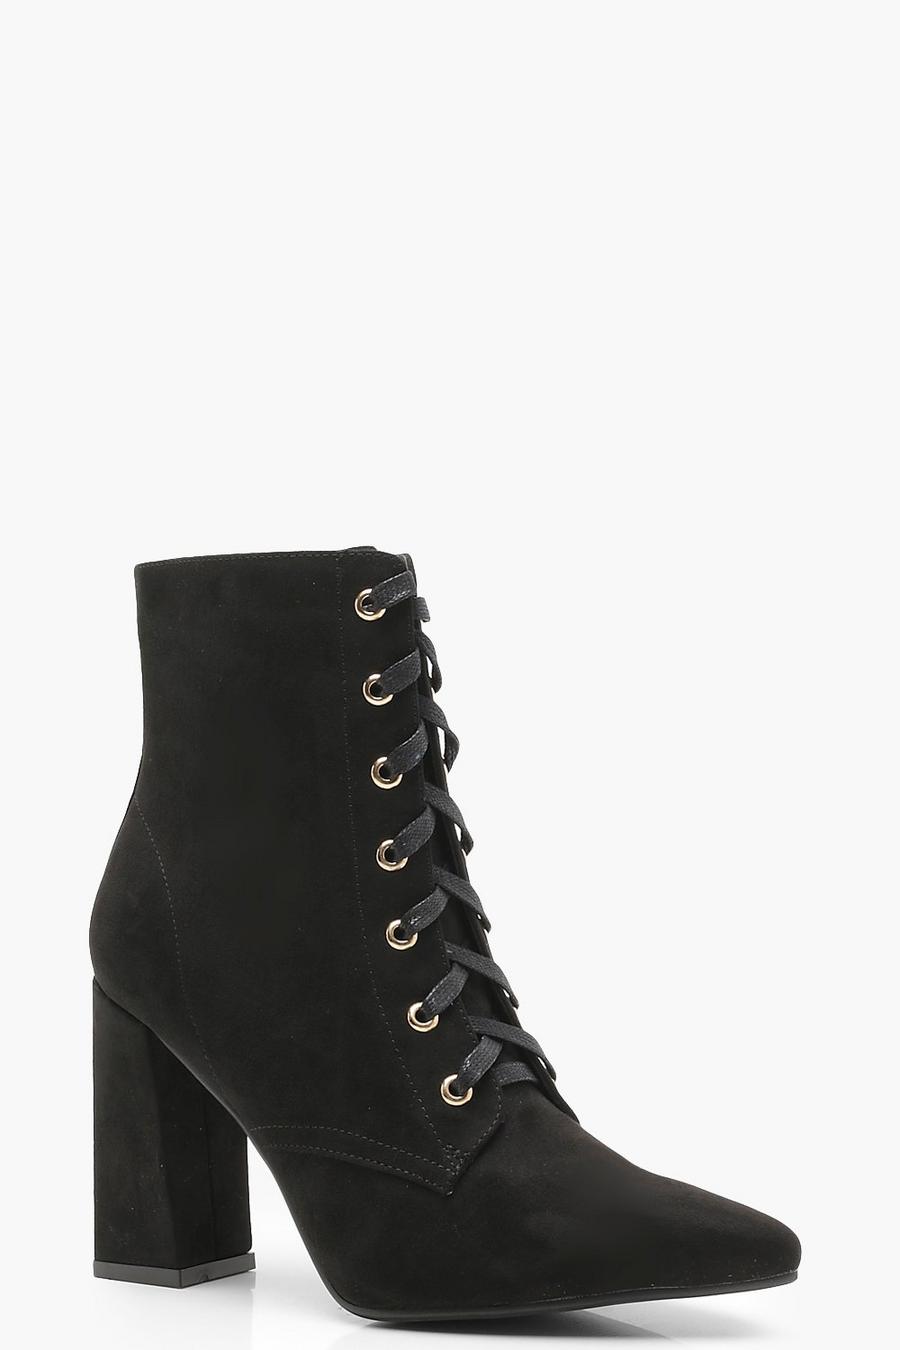 Black Lace Up Pointed Toe Ankle Shoe Boots image number 1